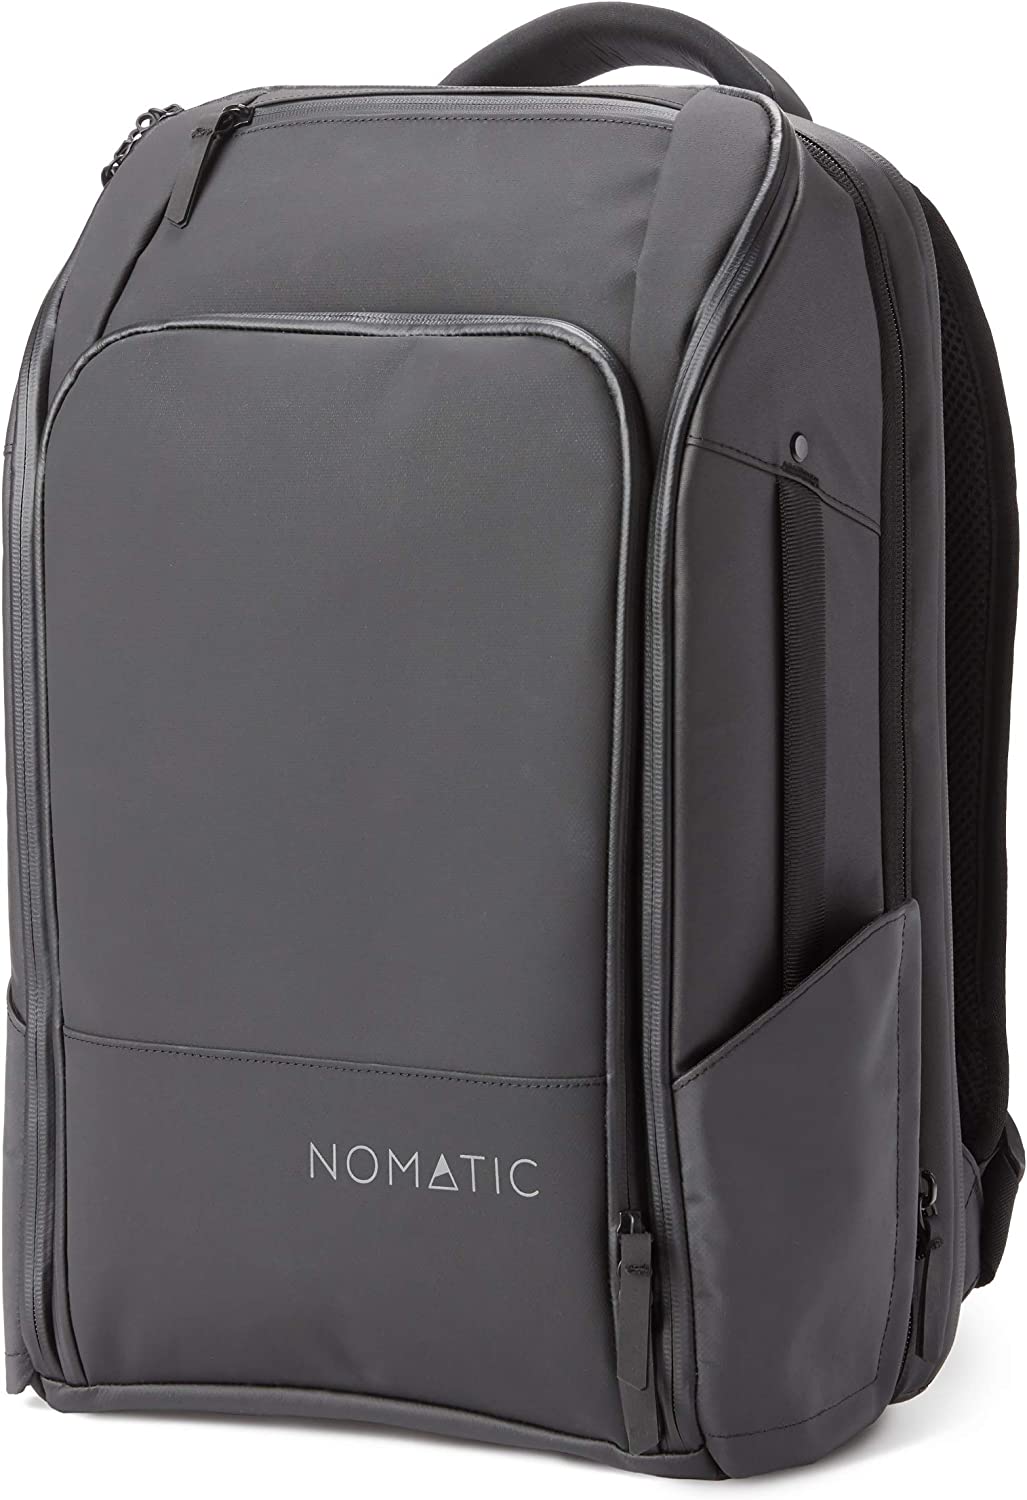 NOMATIC Travel Pack- 20L Water Resistant Anti-Theft [...]